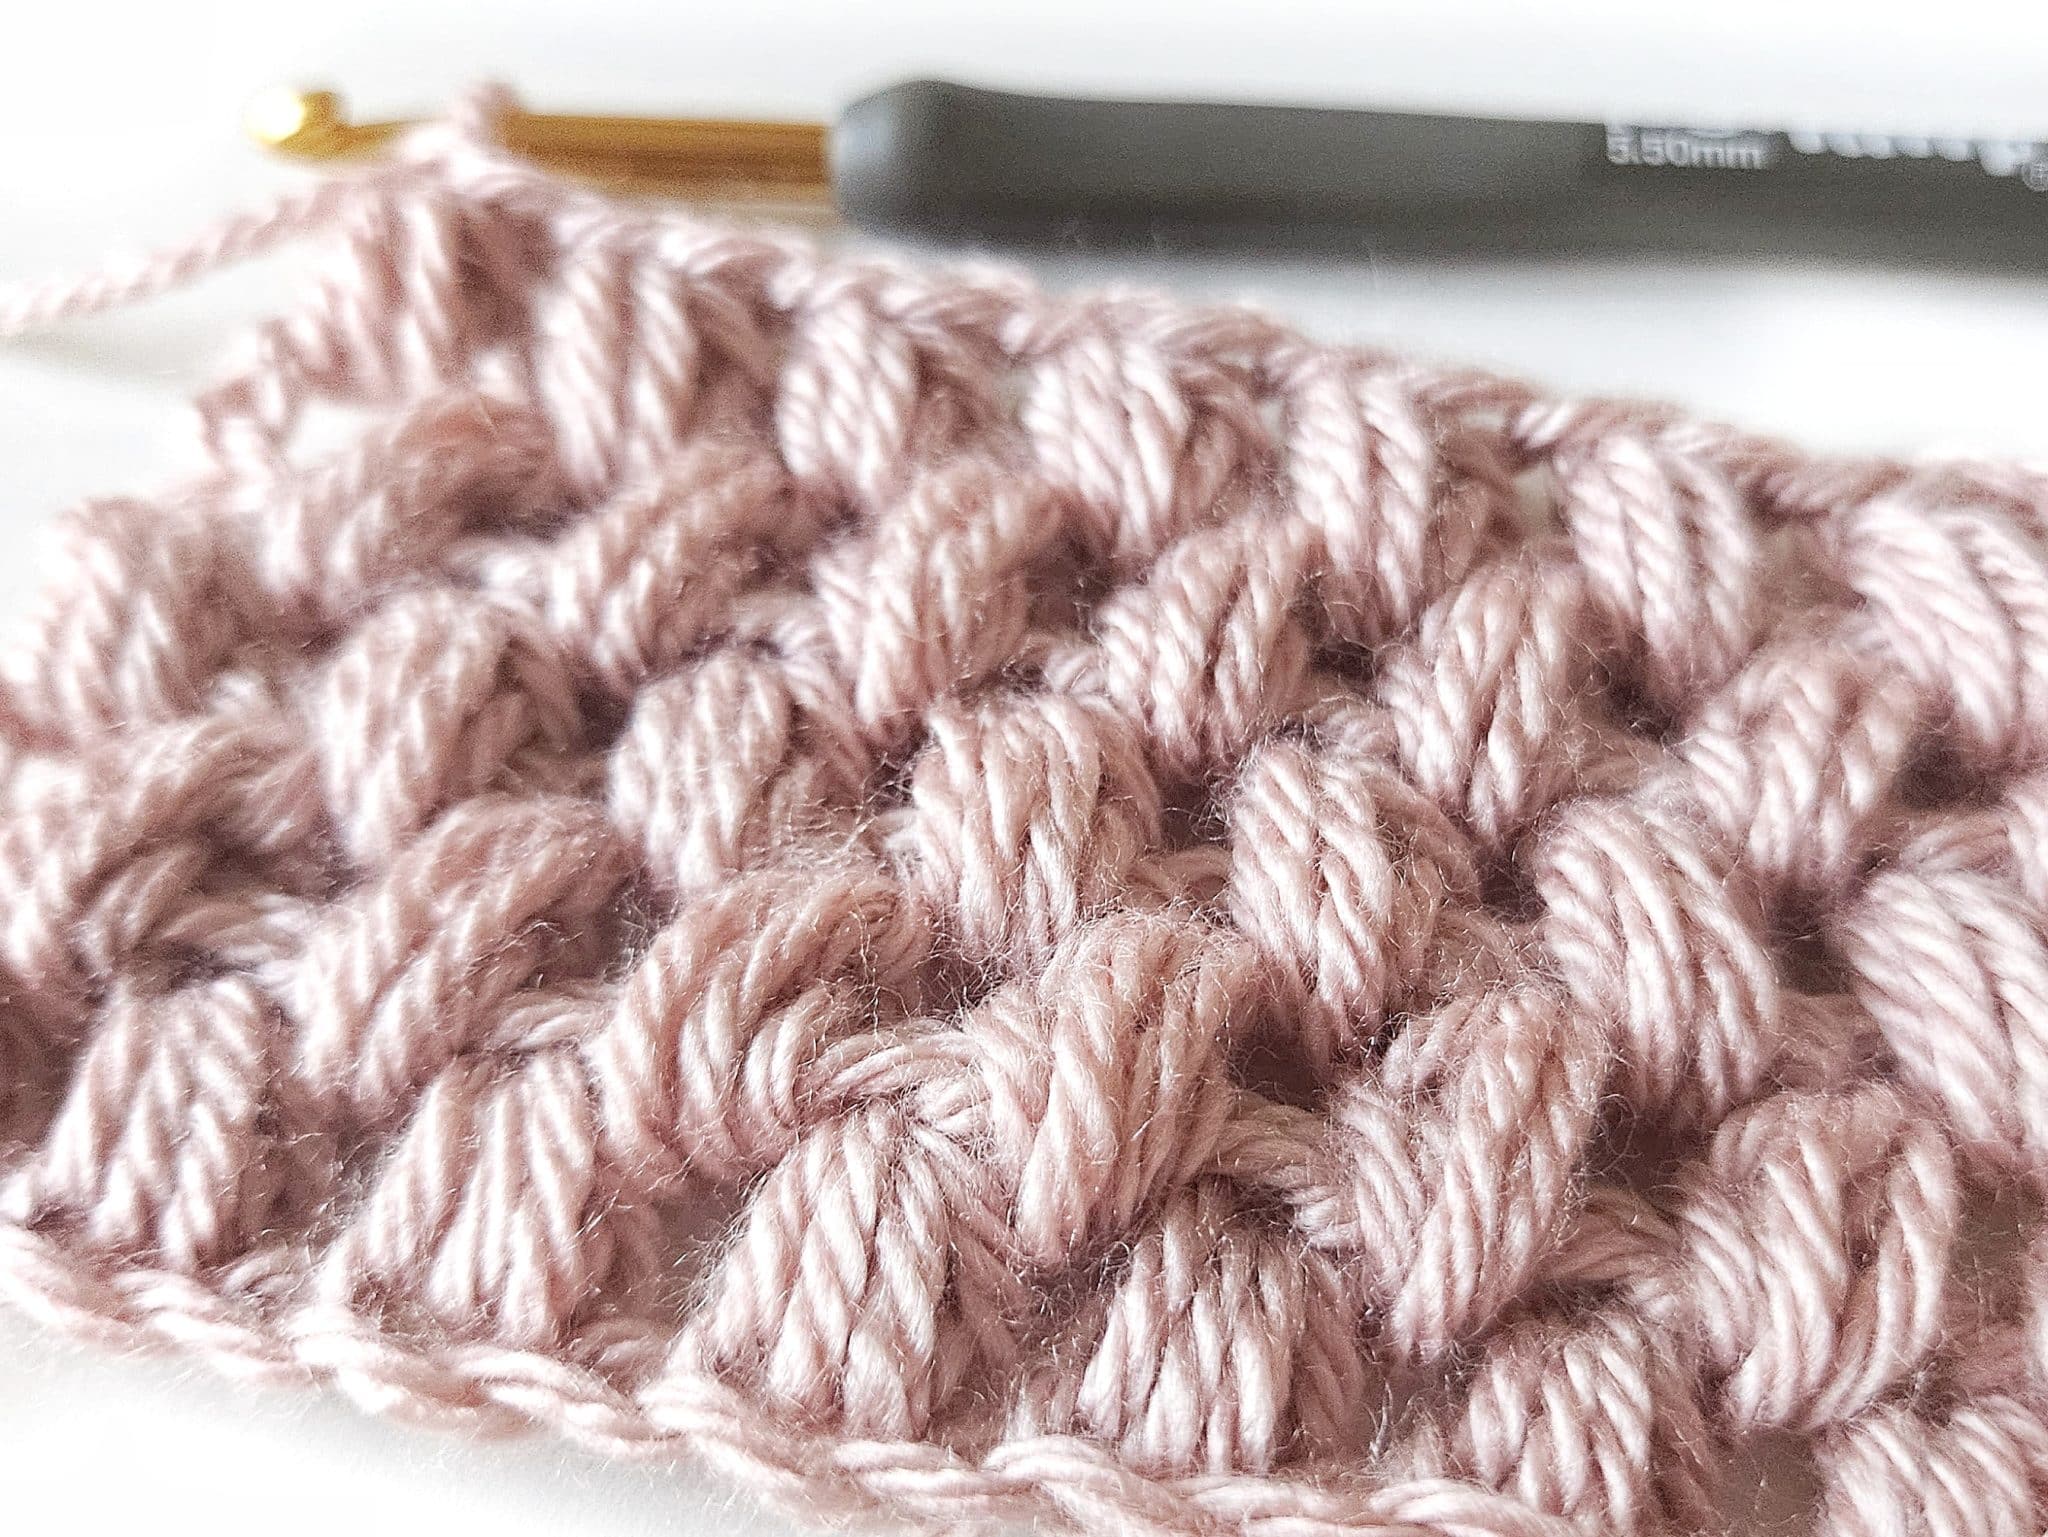 A Quick Guide to Knit-Look Crochet Stitches